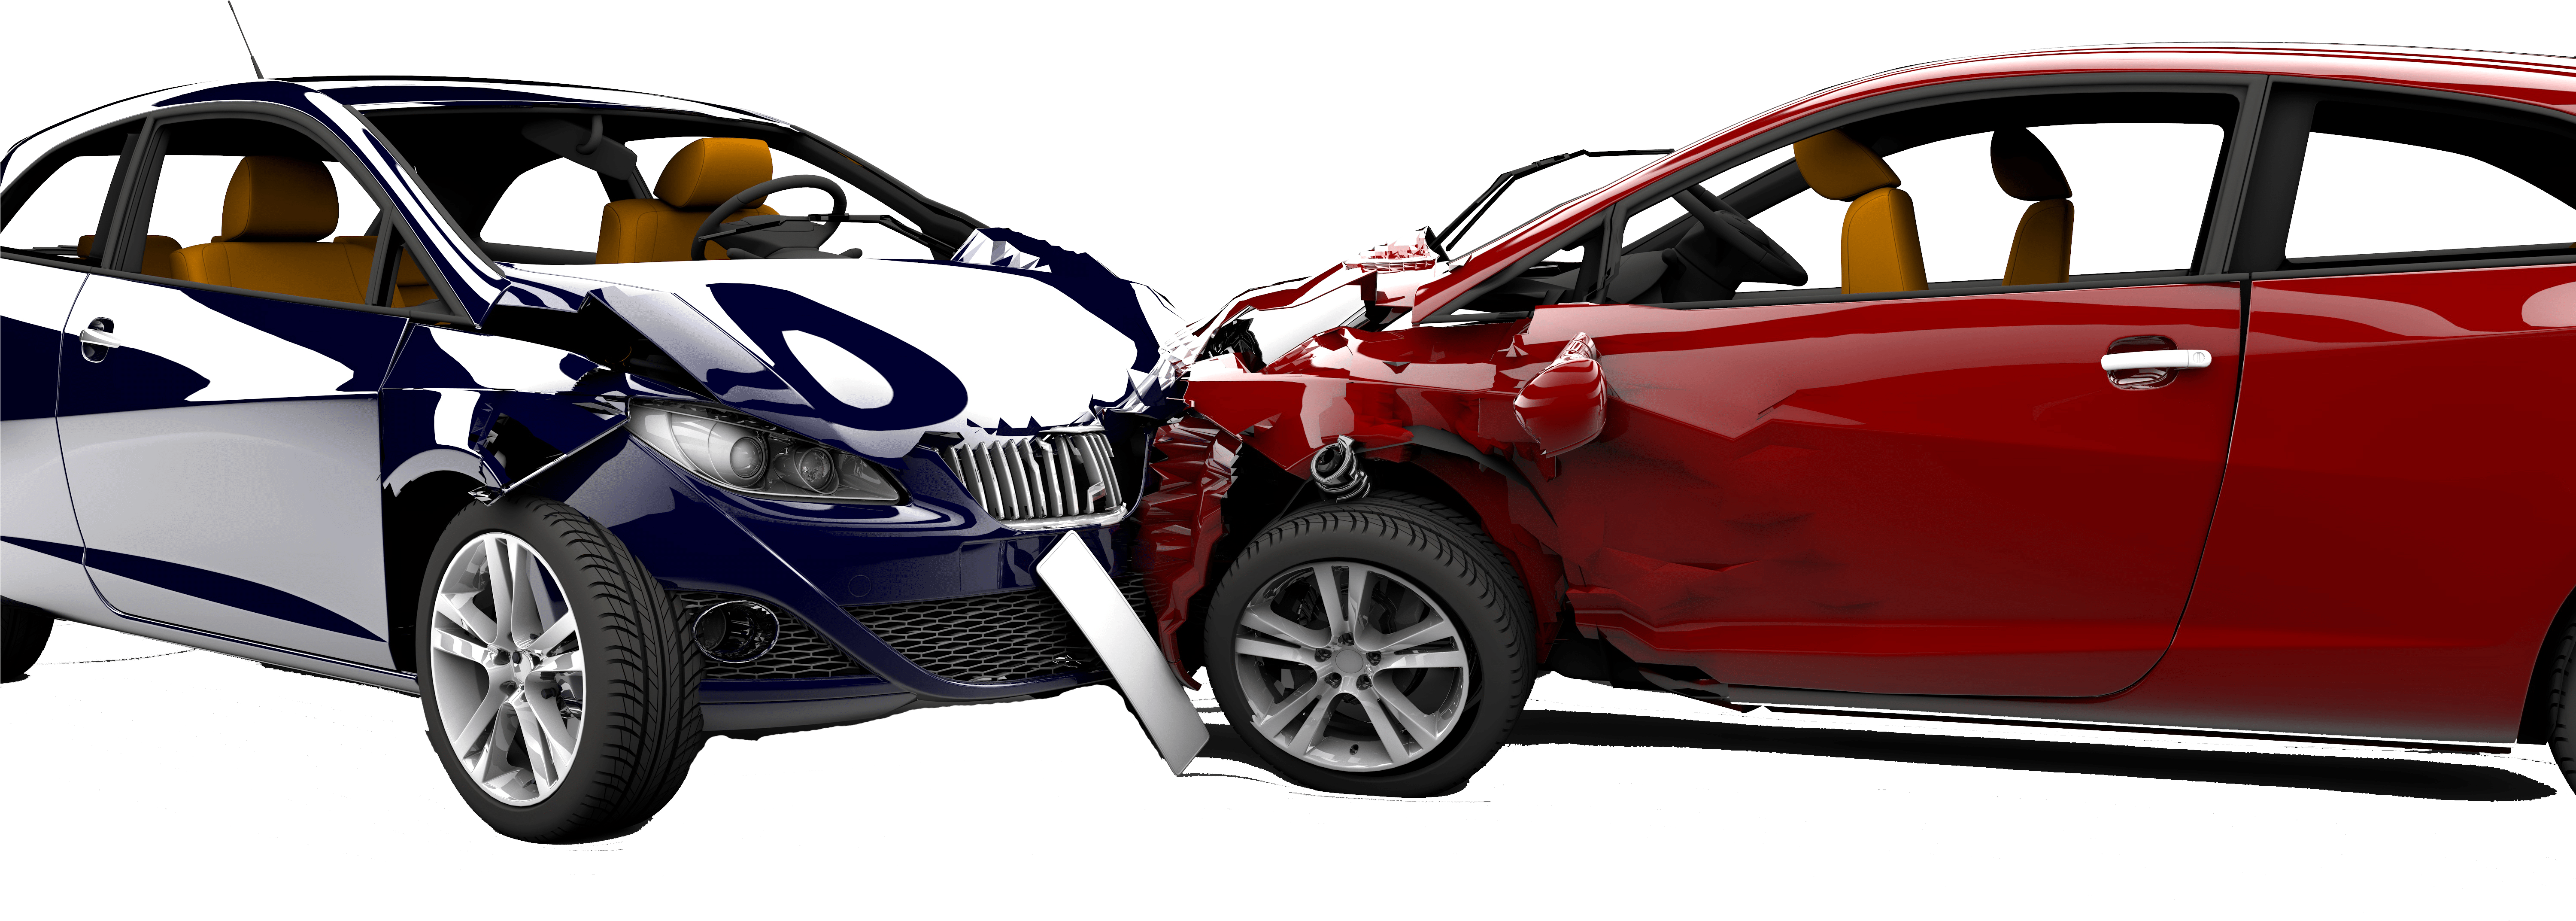 Two Car Collision Damage PNG